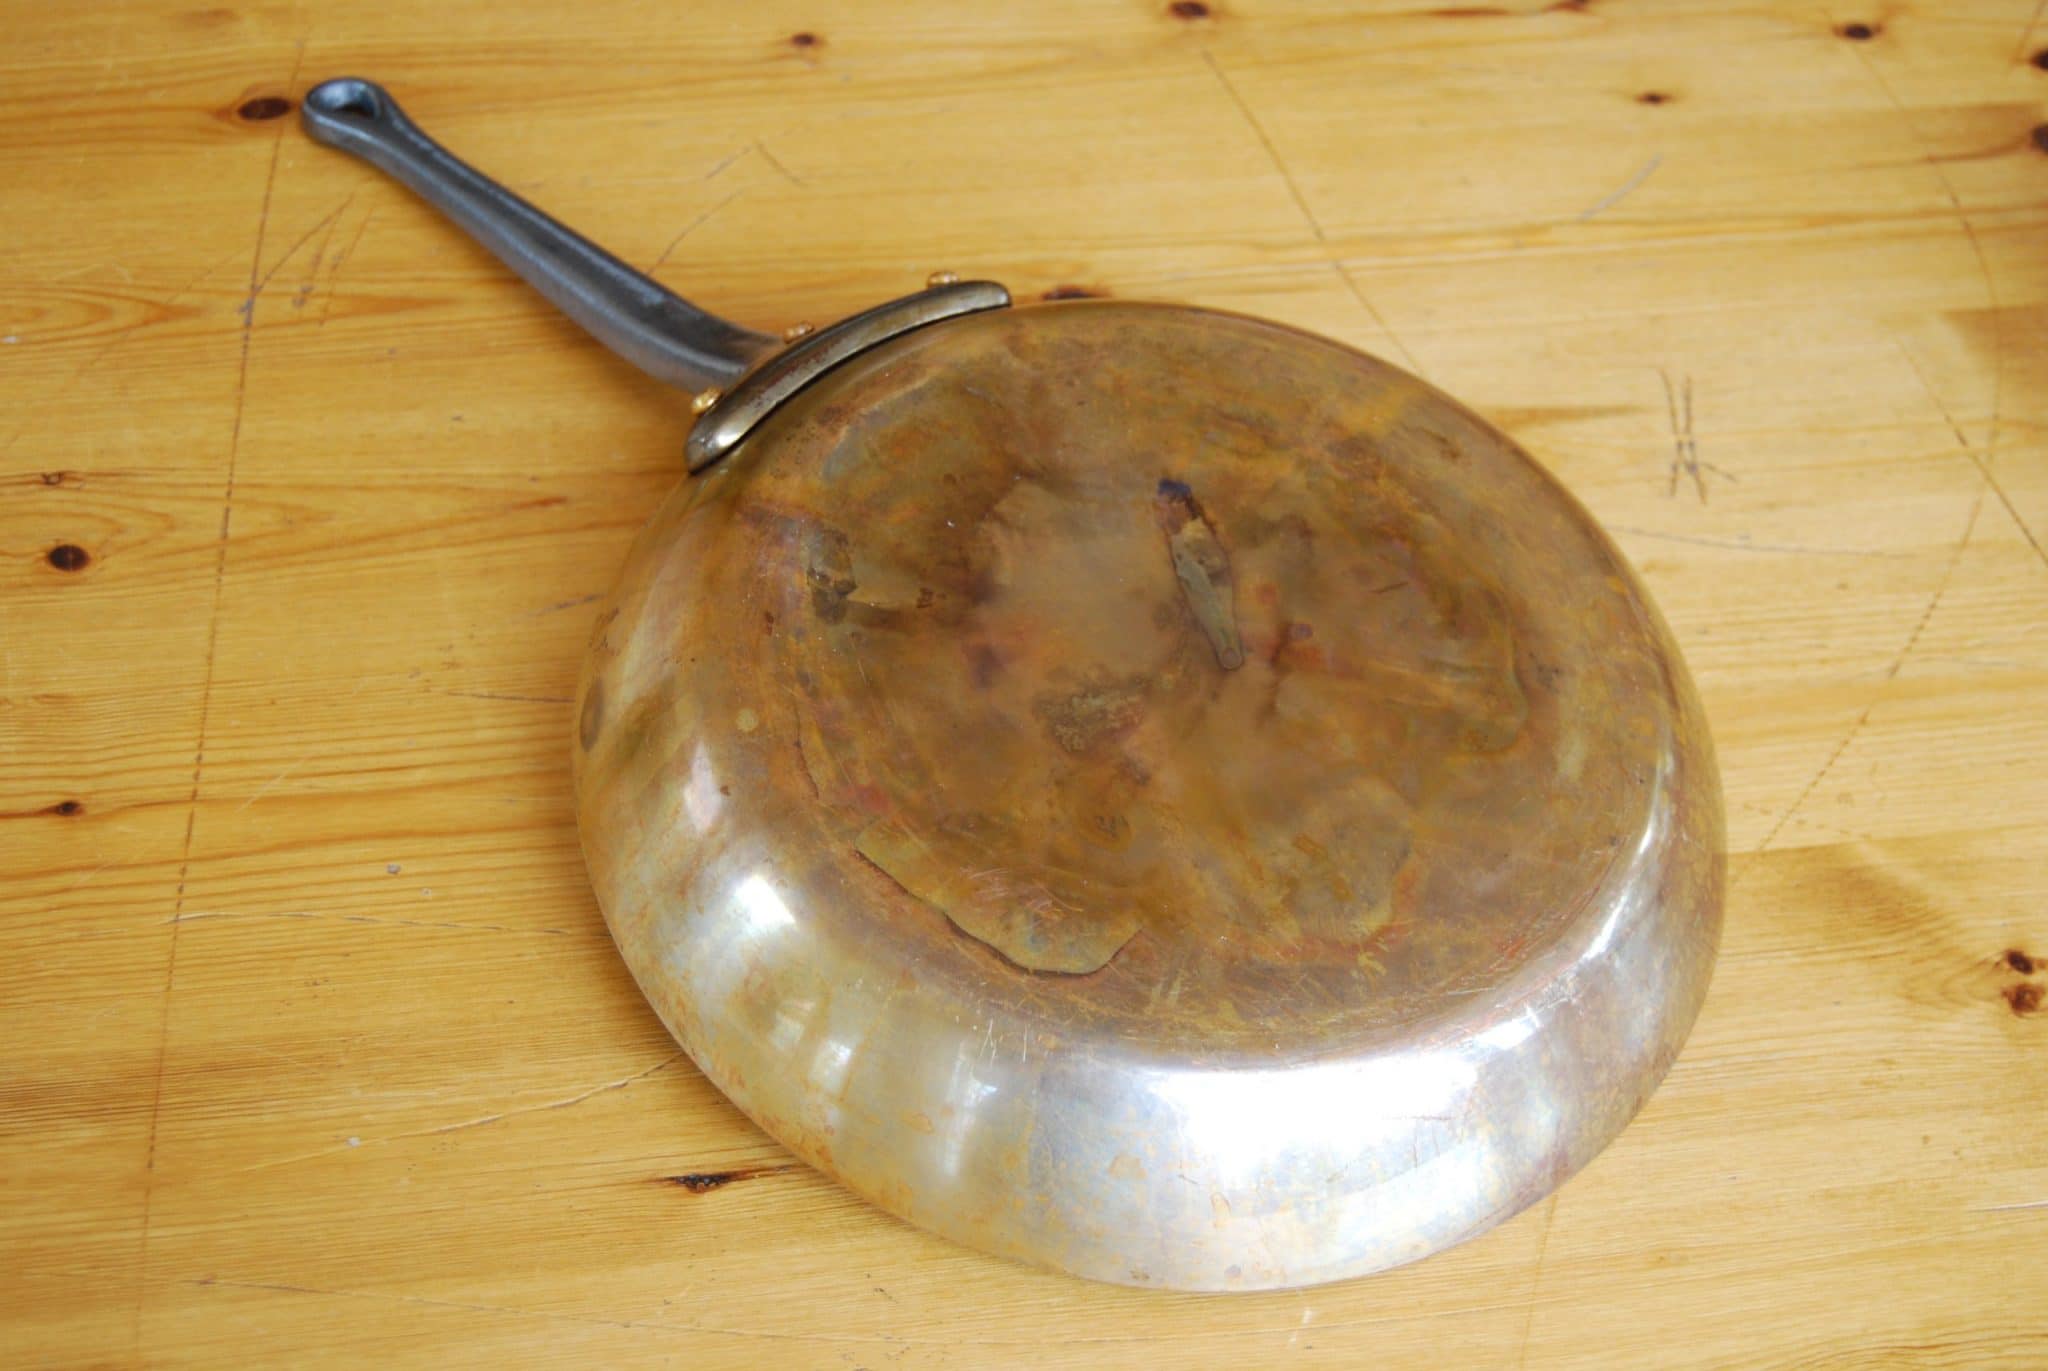 26cm and 31cm Mauviel skillets